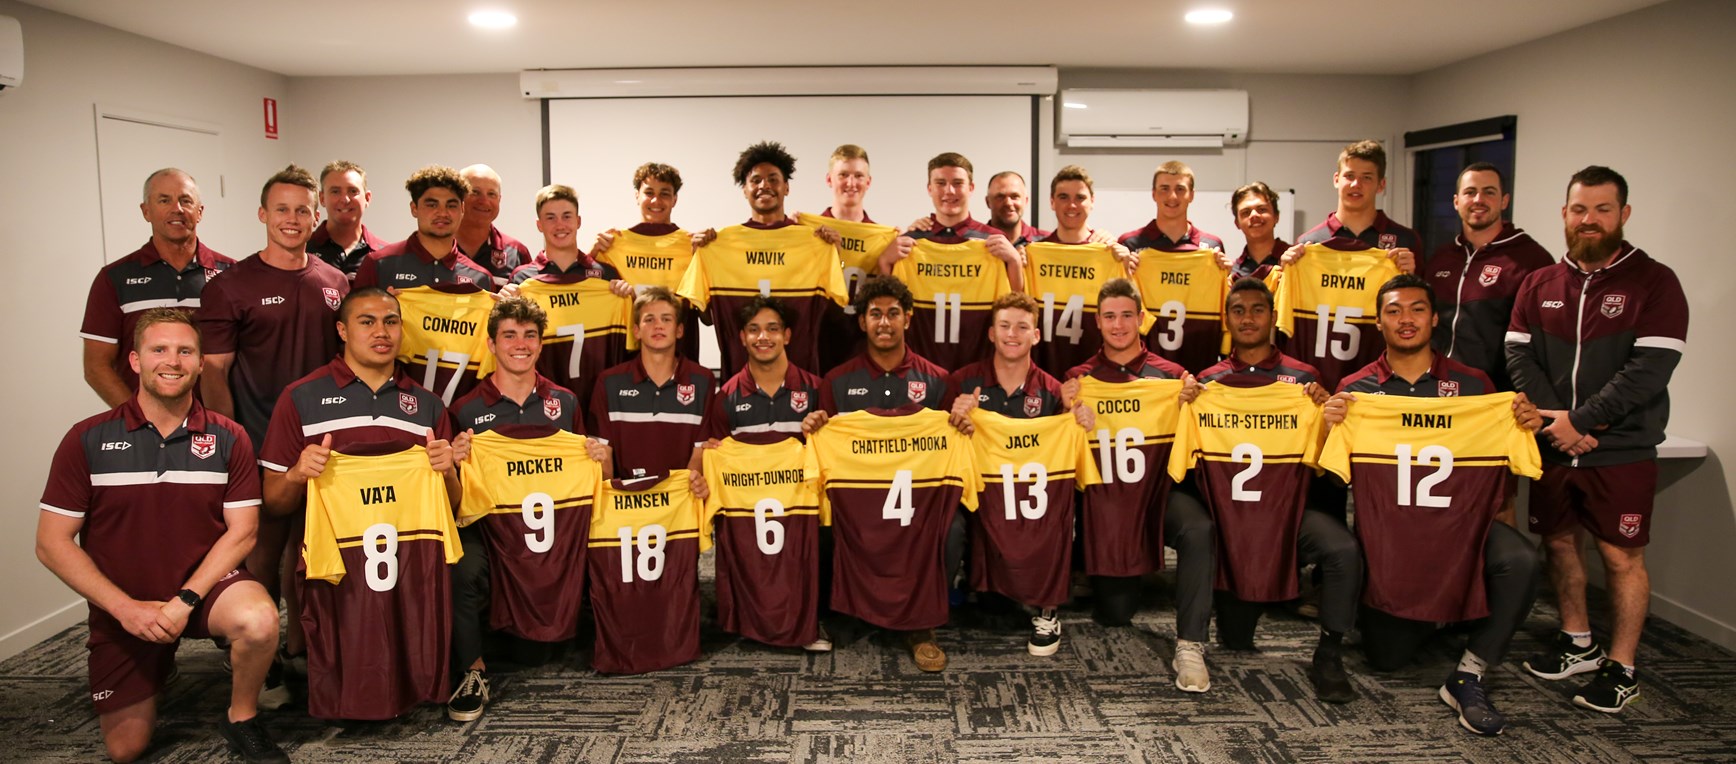 In pictures: Queensland Under 16 Country jersey presentation